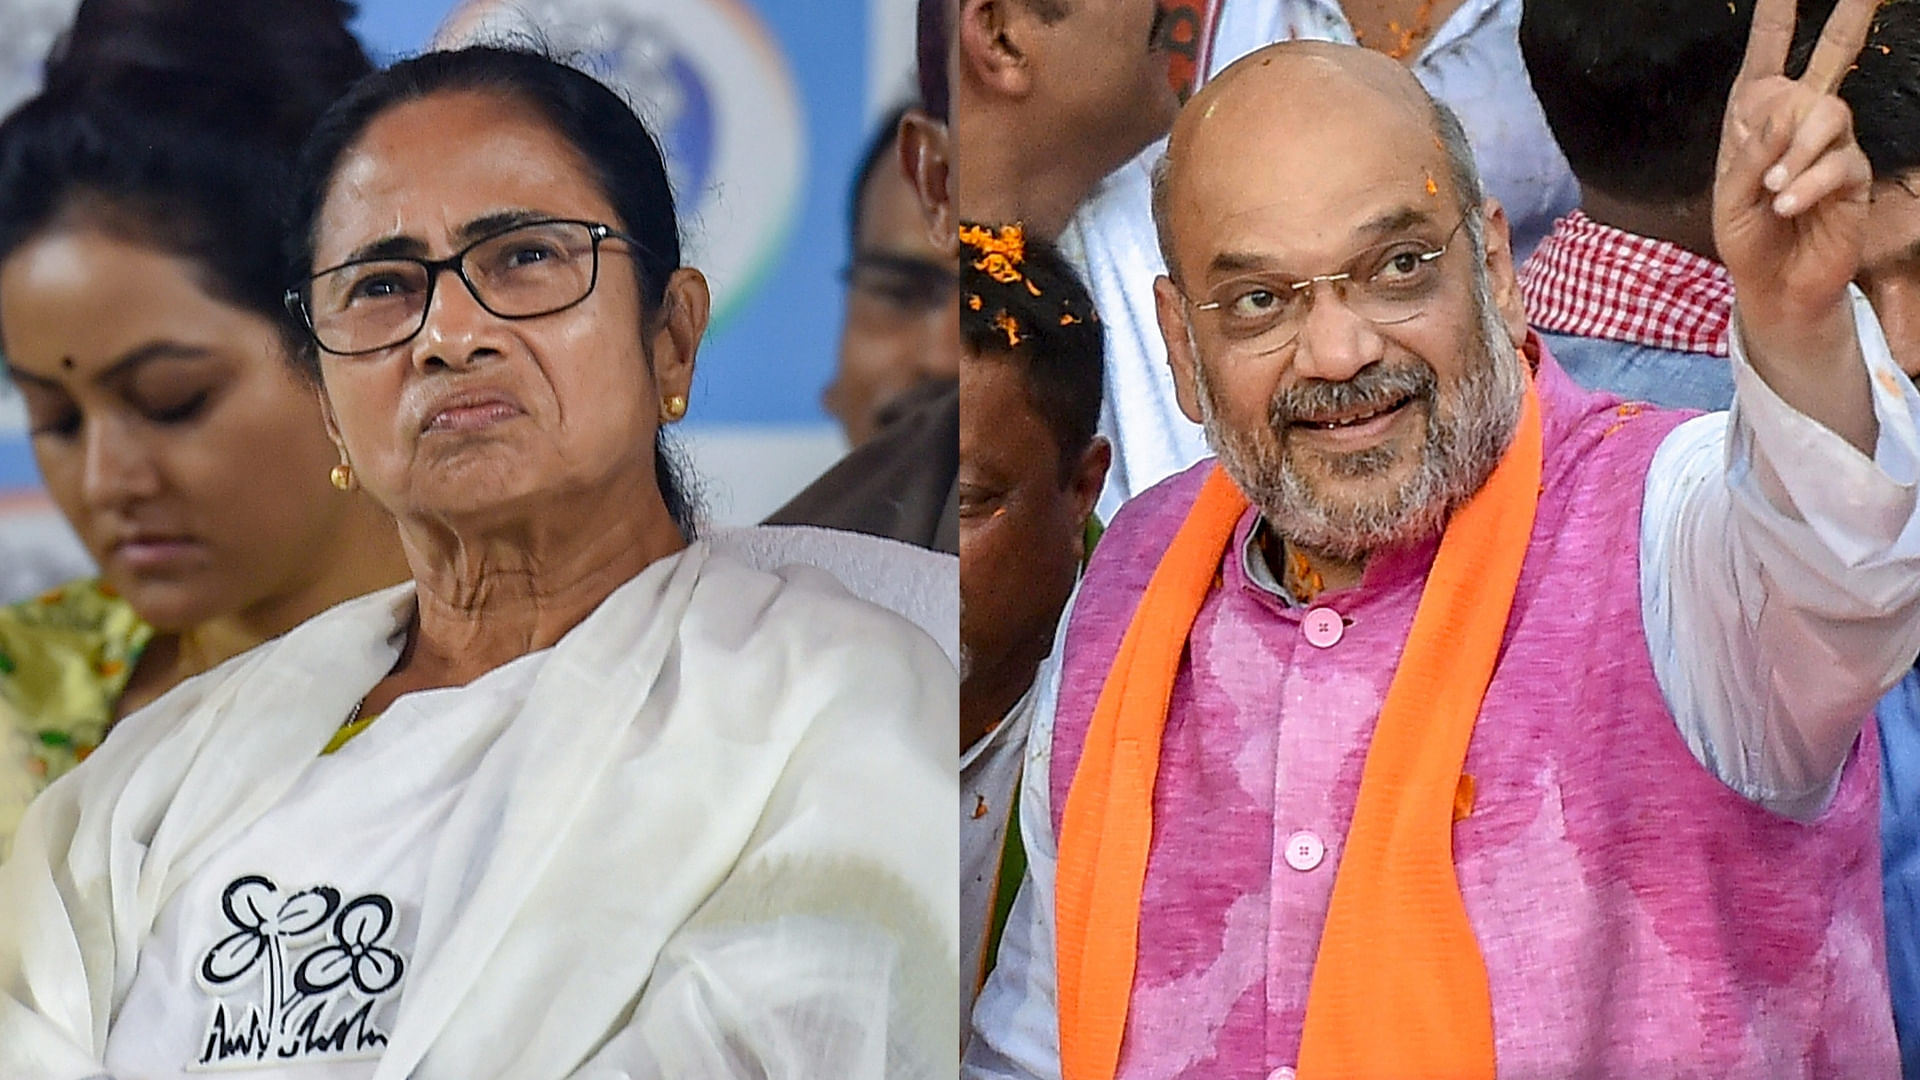 West Bengal Chief Minister Mamata Banerjee and BJP Chief Amit Shah.